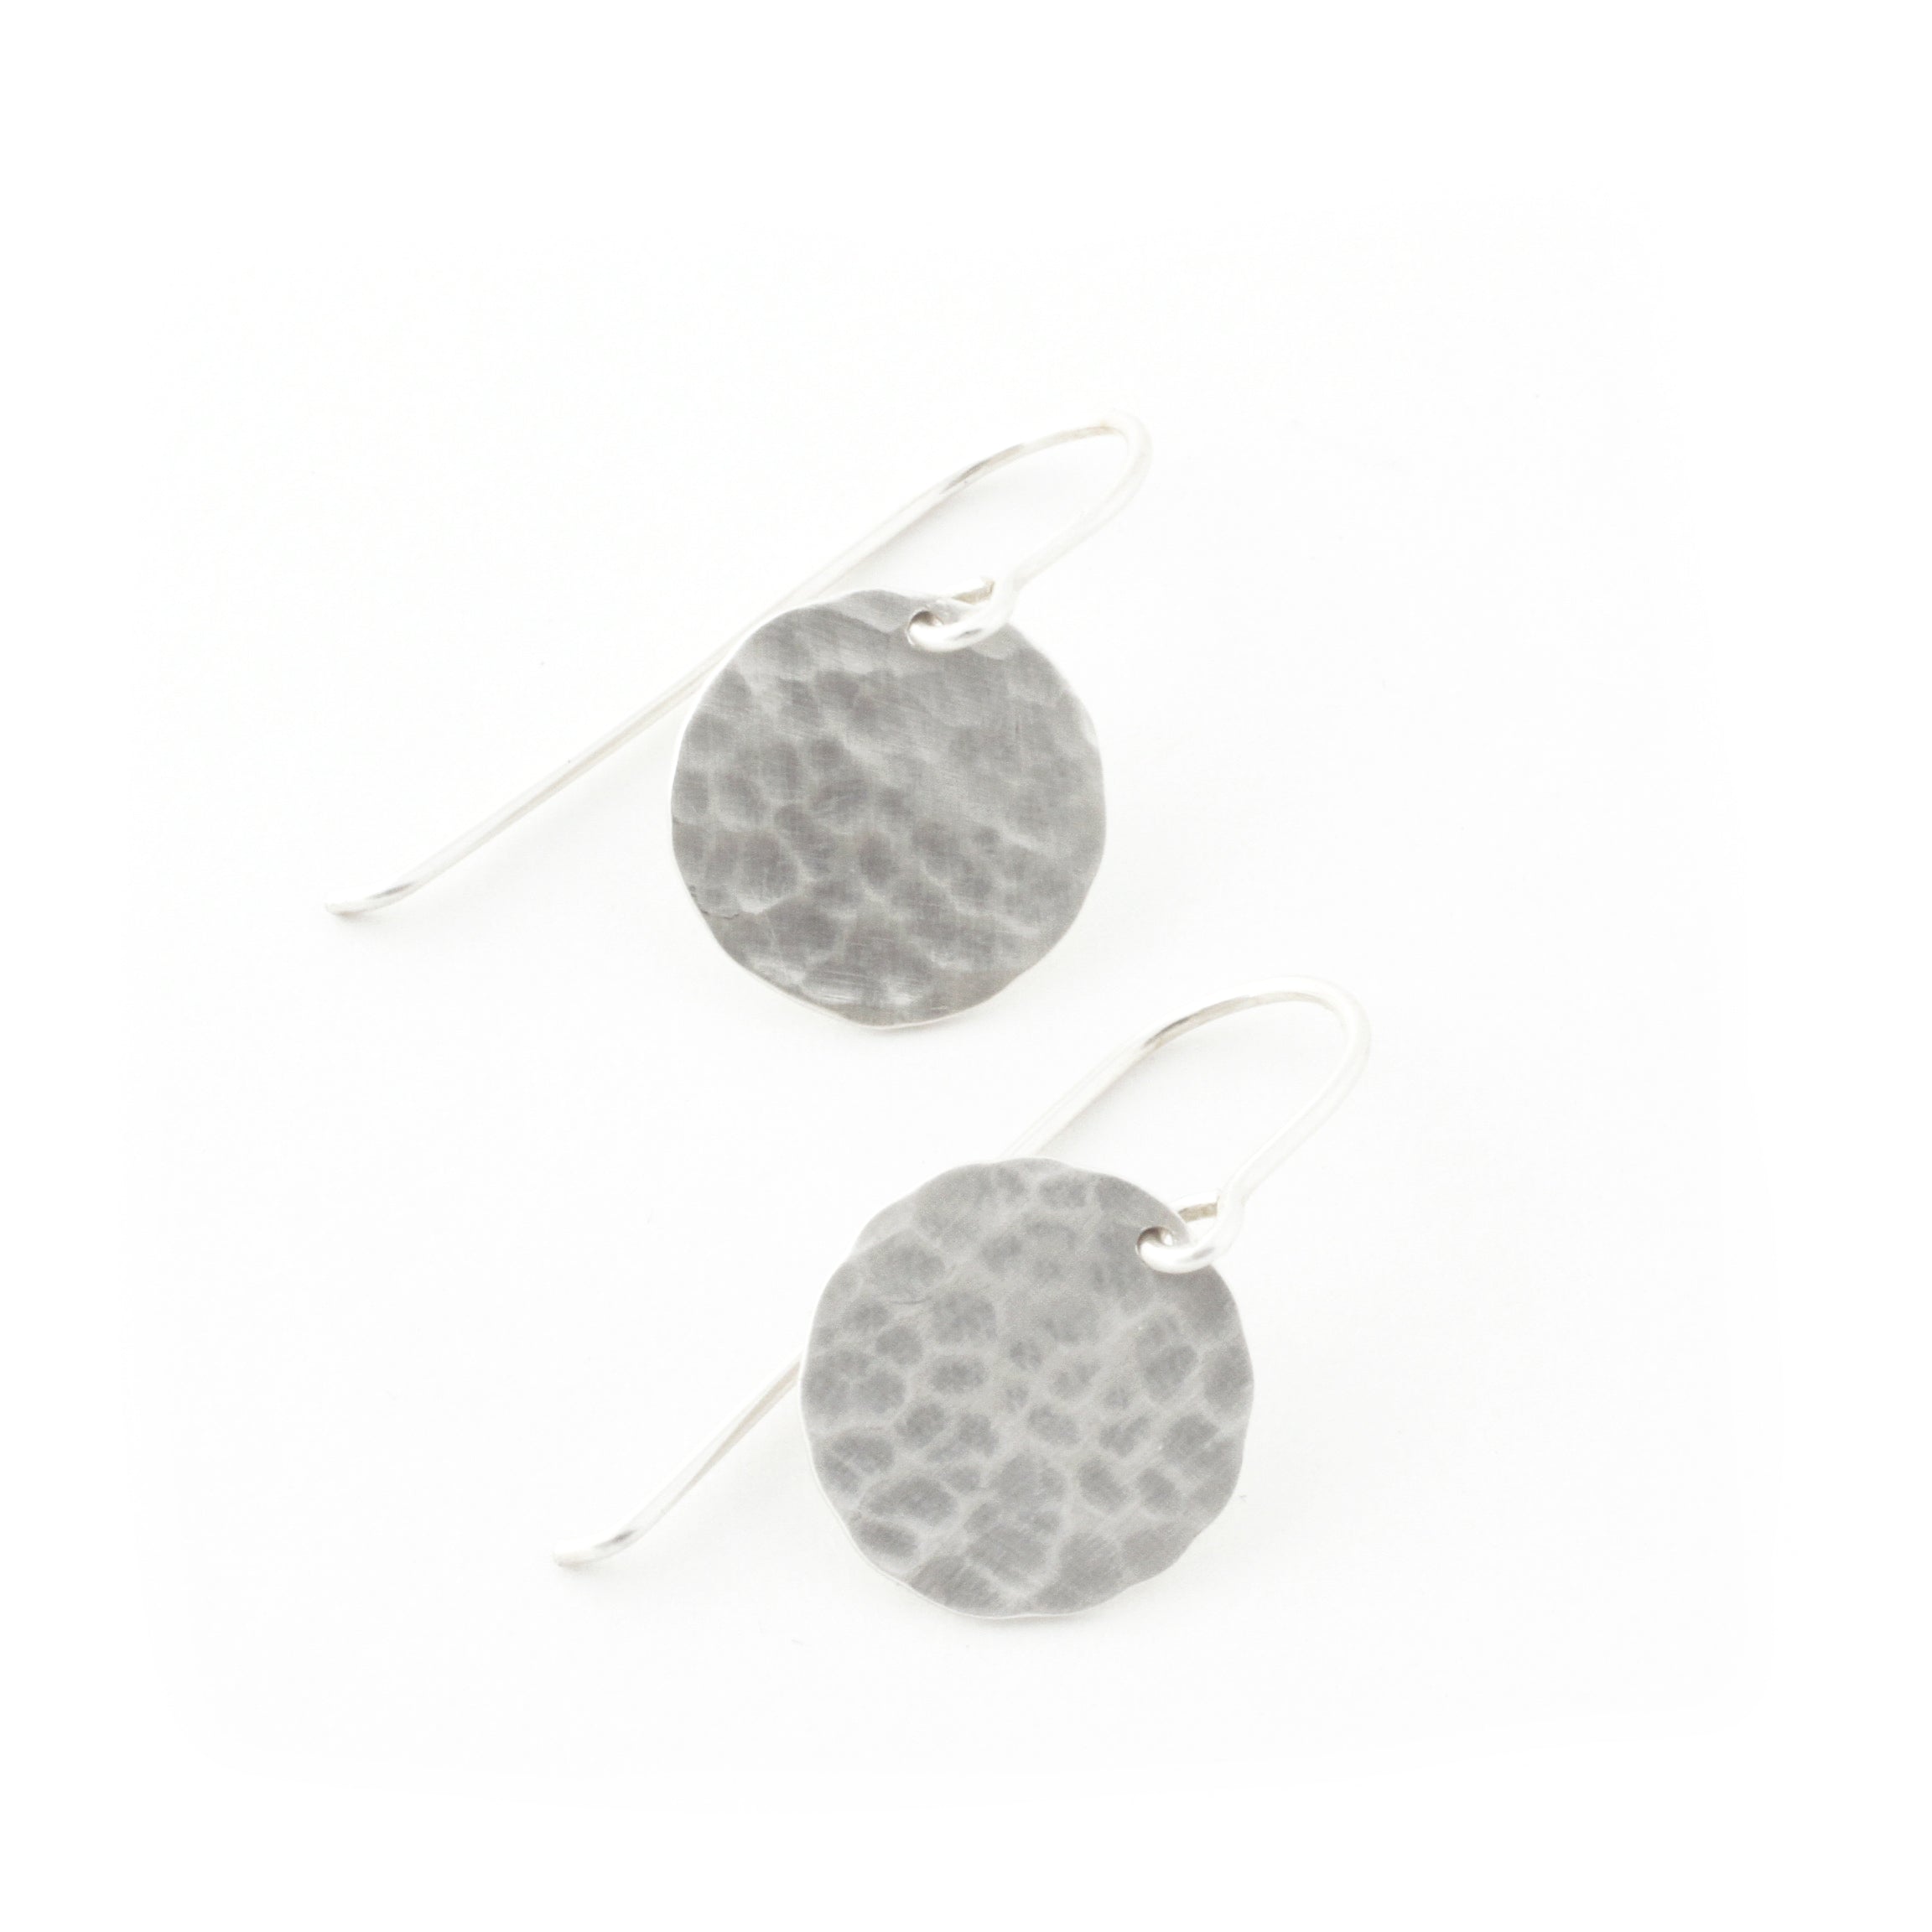 Luna Hammered Earrings (Small)